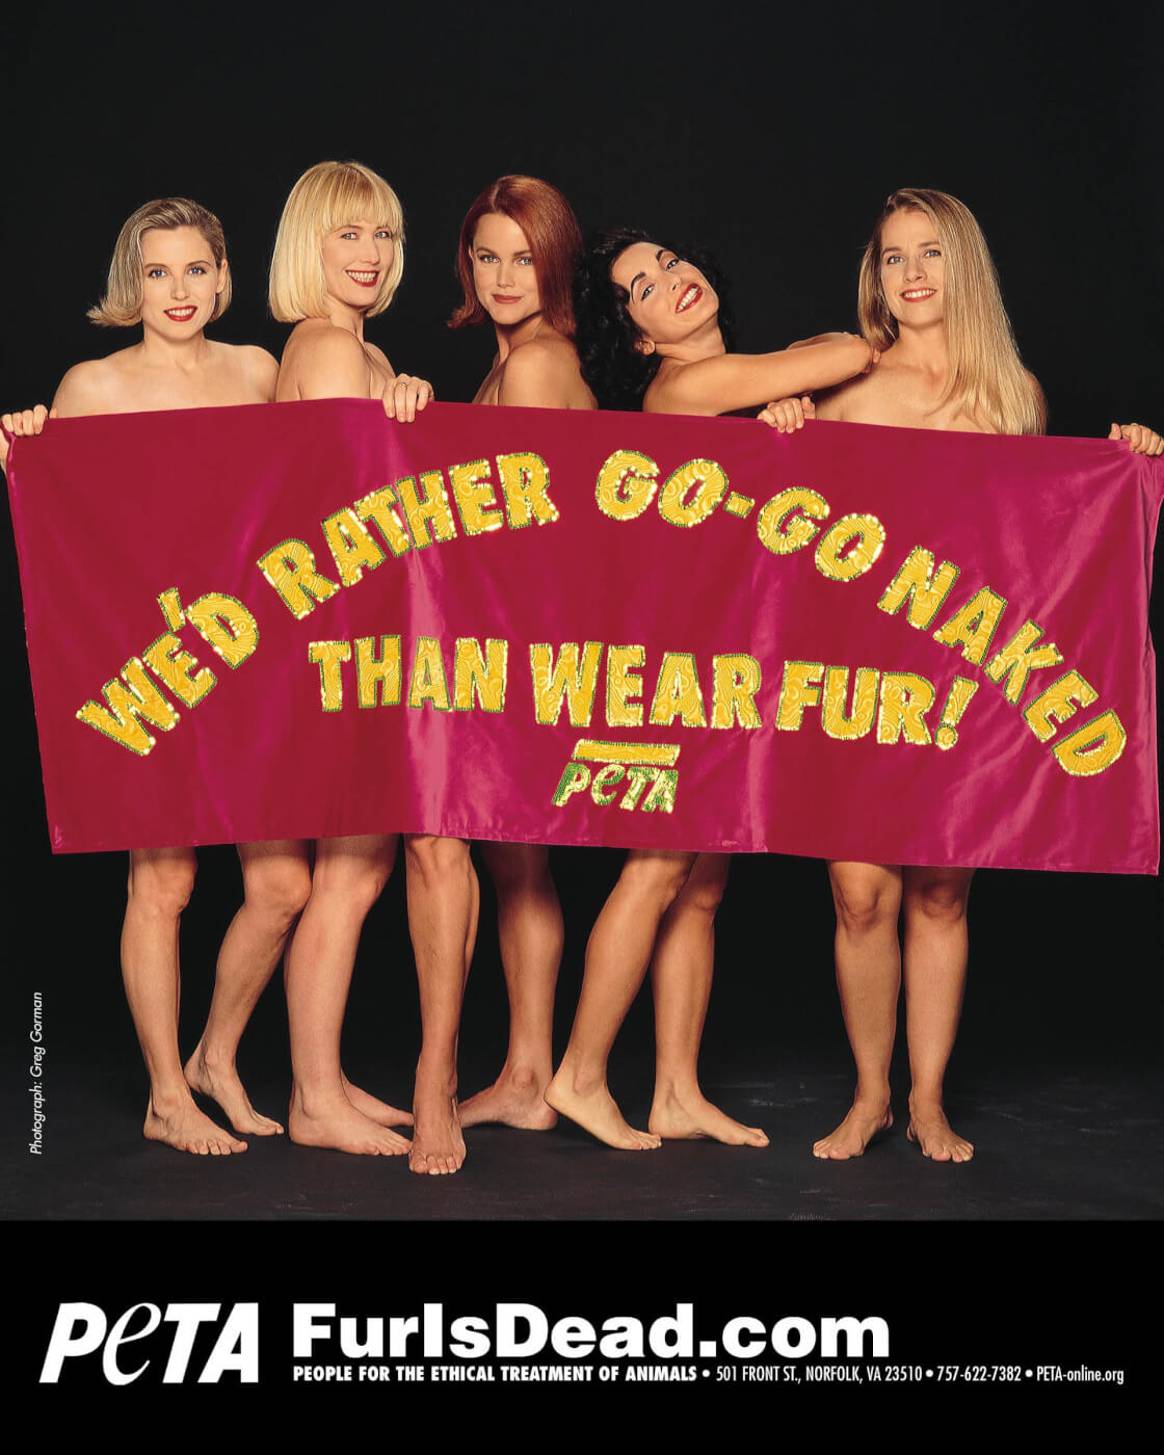 Claiming victory, PETA ends 30-year campaign against fur